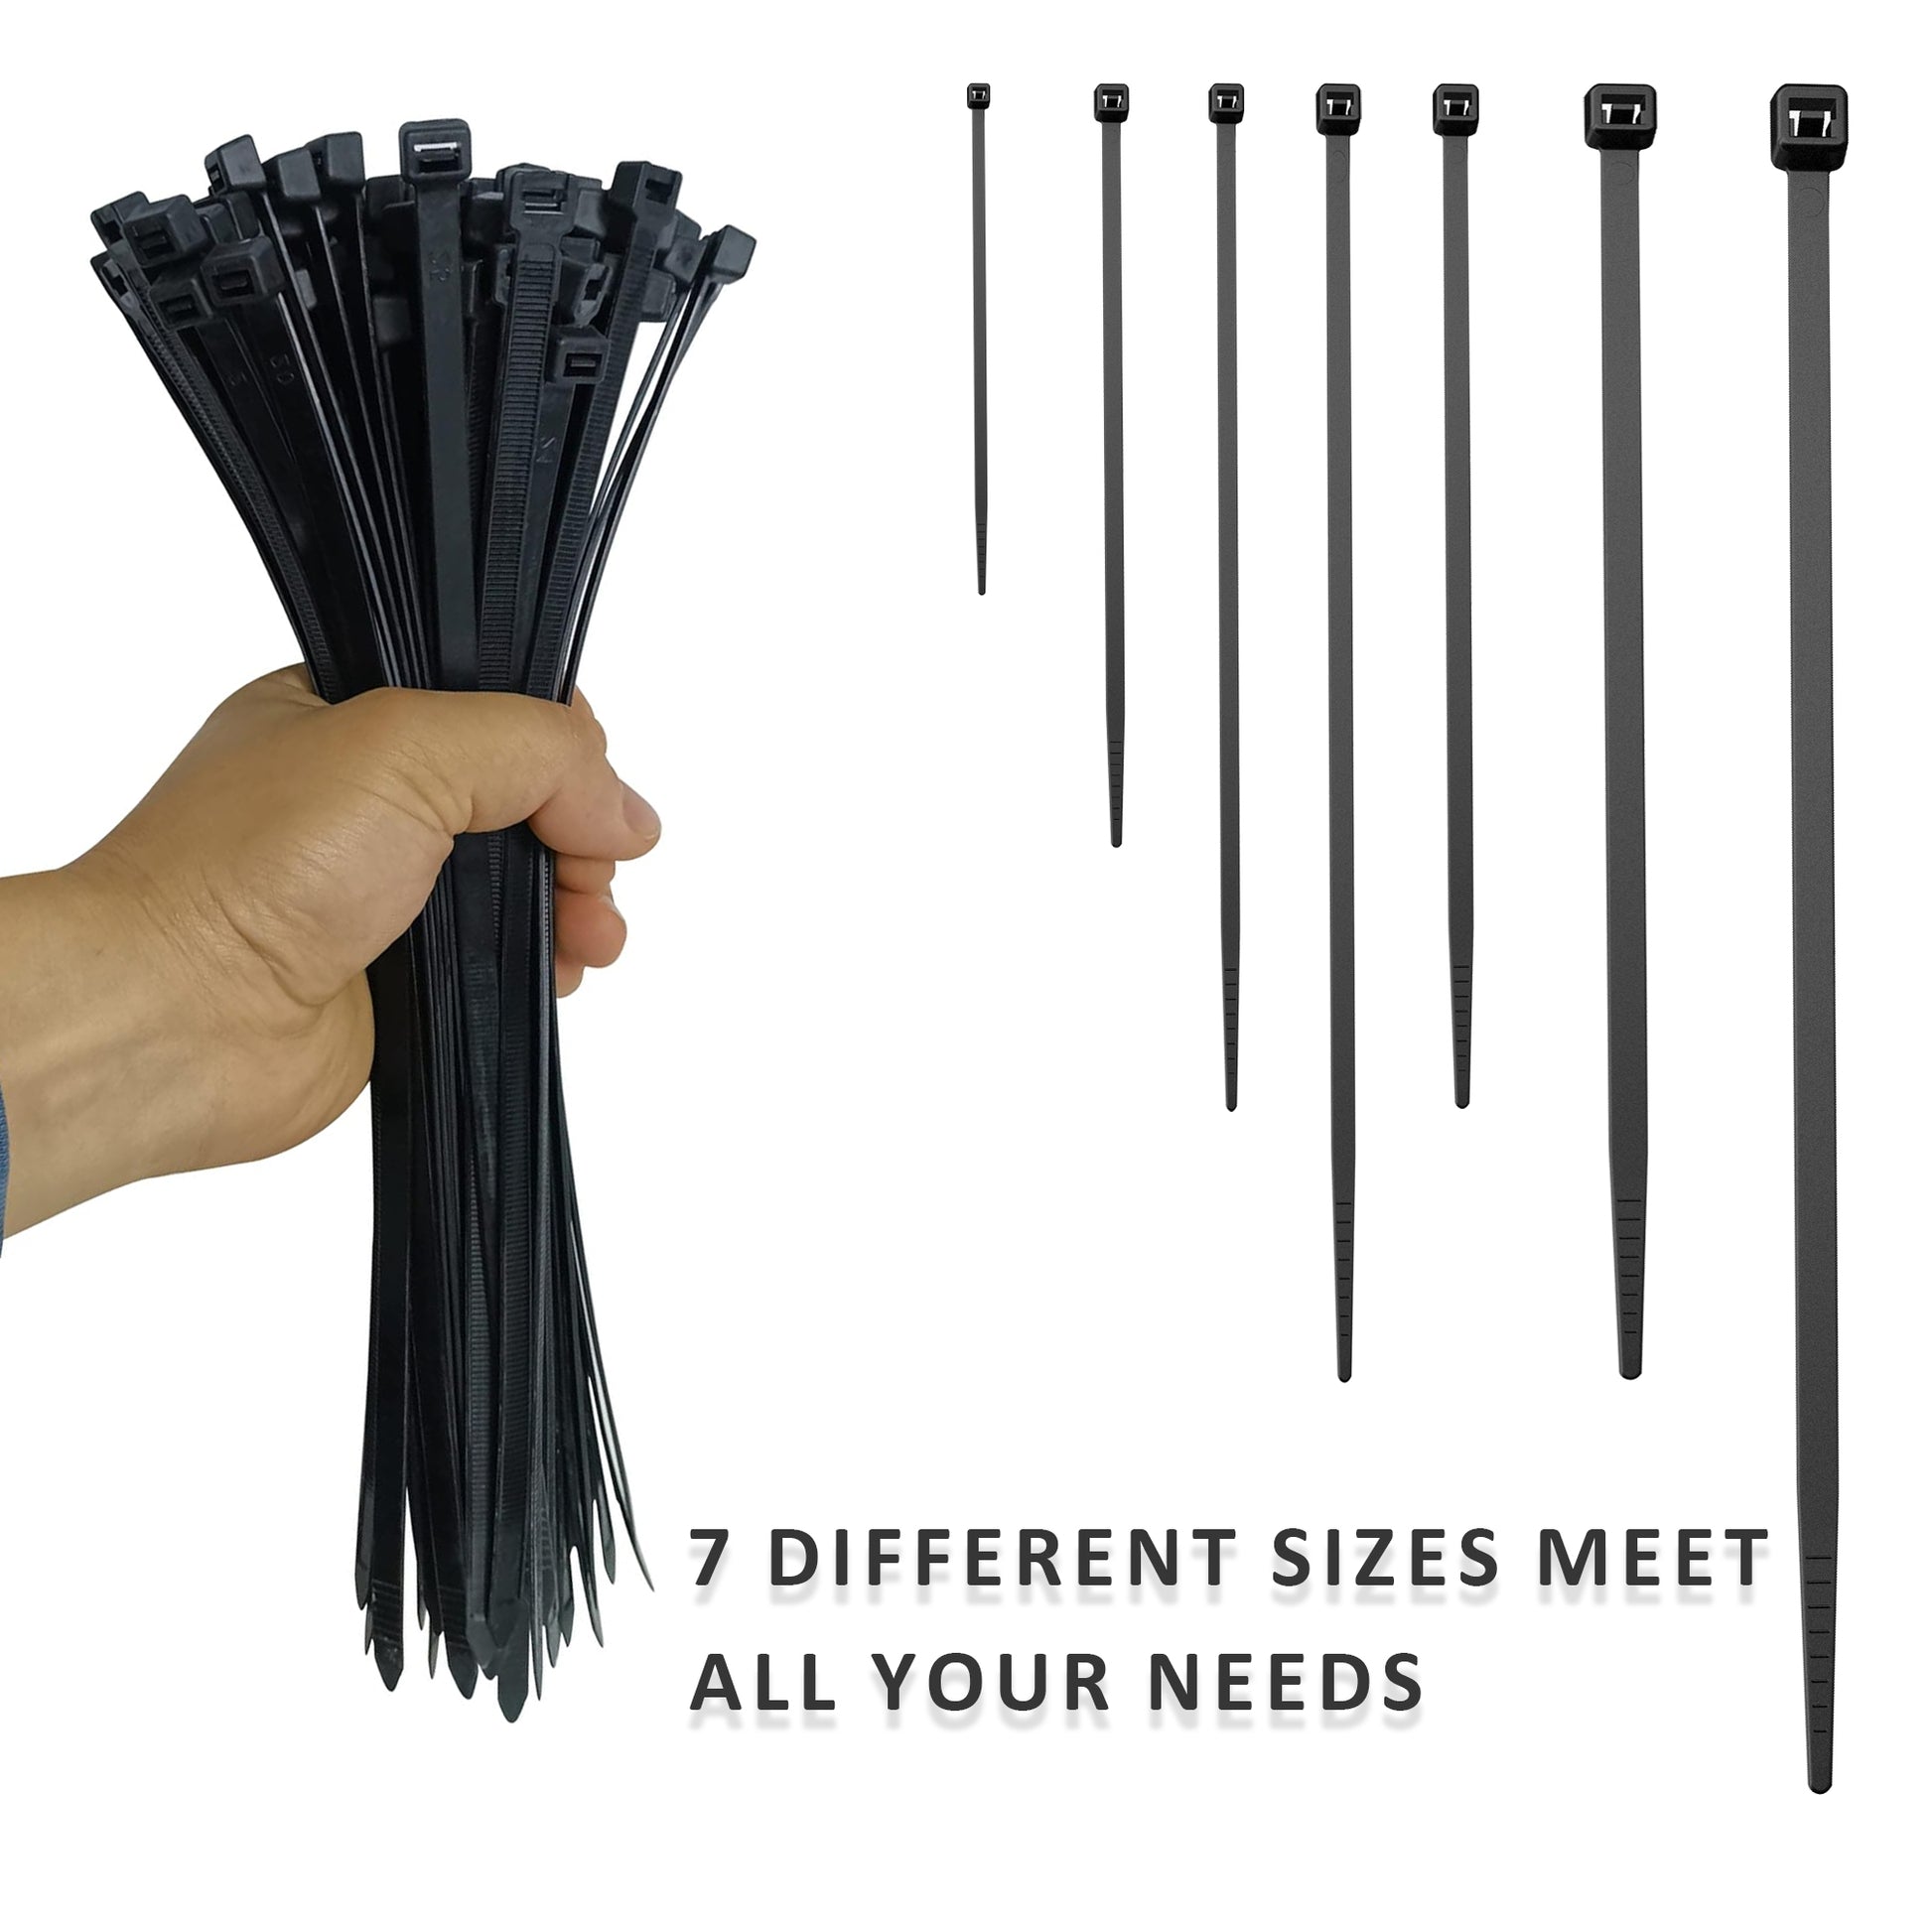 Black self-locking nylon cable ties for heavy-duty wire organization